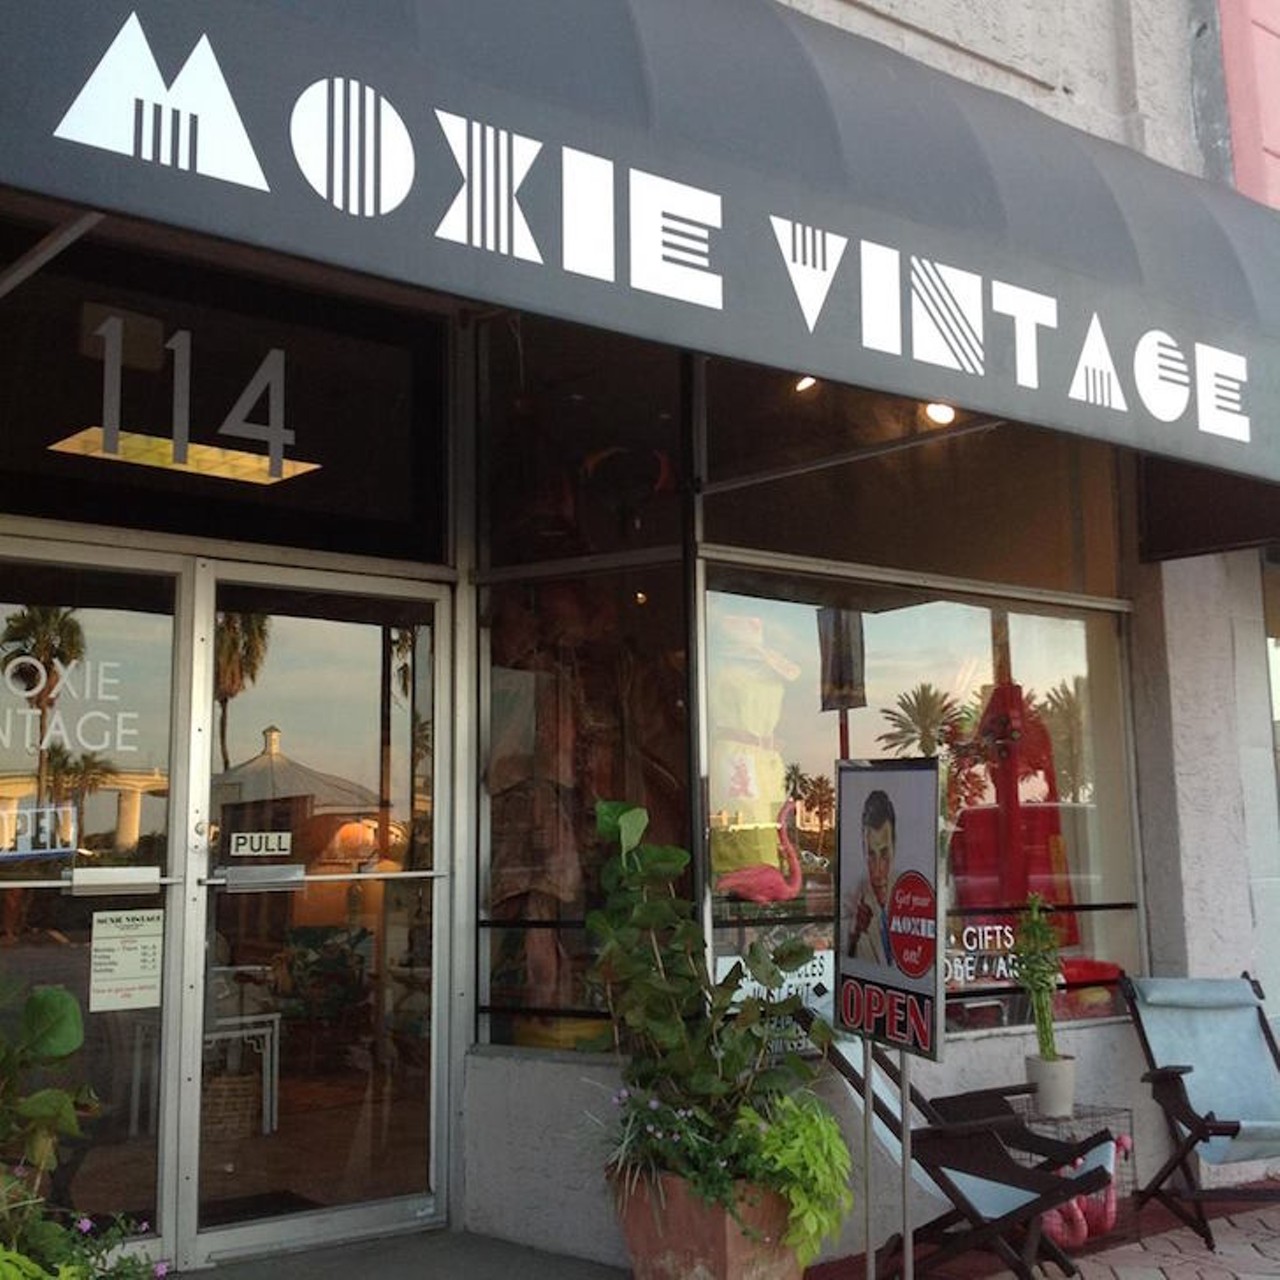 Moxie Vintage  
114 N. Beach St., Daytona Beach
Stop in to meet Daniel and style yourself up from his creative displays of vintage and retro fashion and unique ephemera. No selfies allowed in the store, by the way. Tip: Pick up a vintage woven straw beach bag.
Photo via Moxie Vintage/Facebook